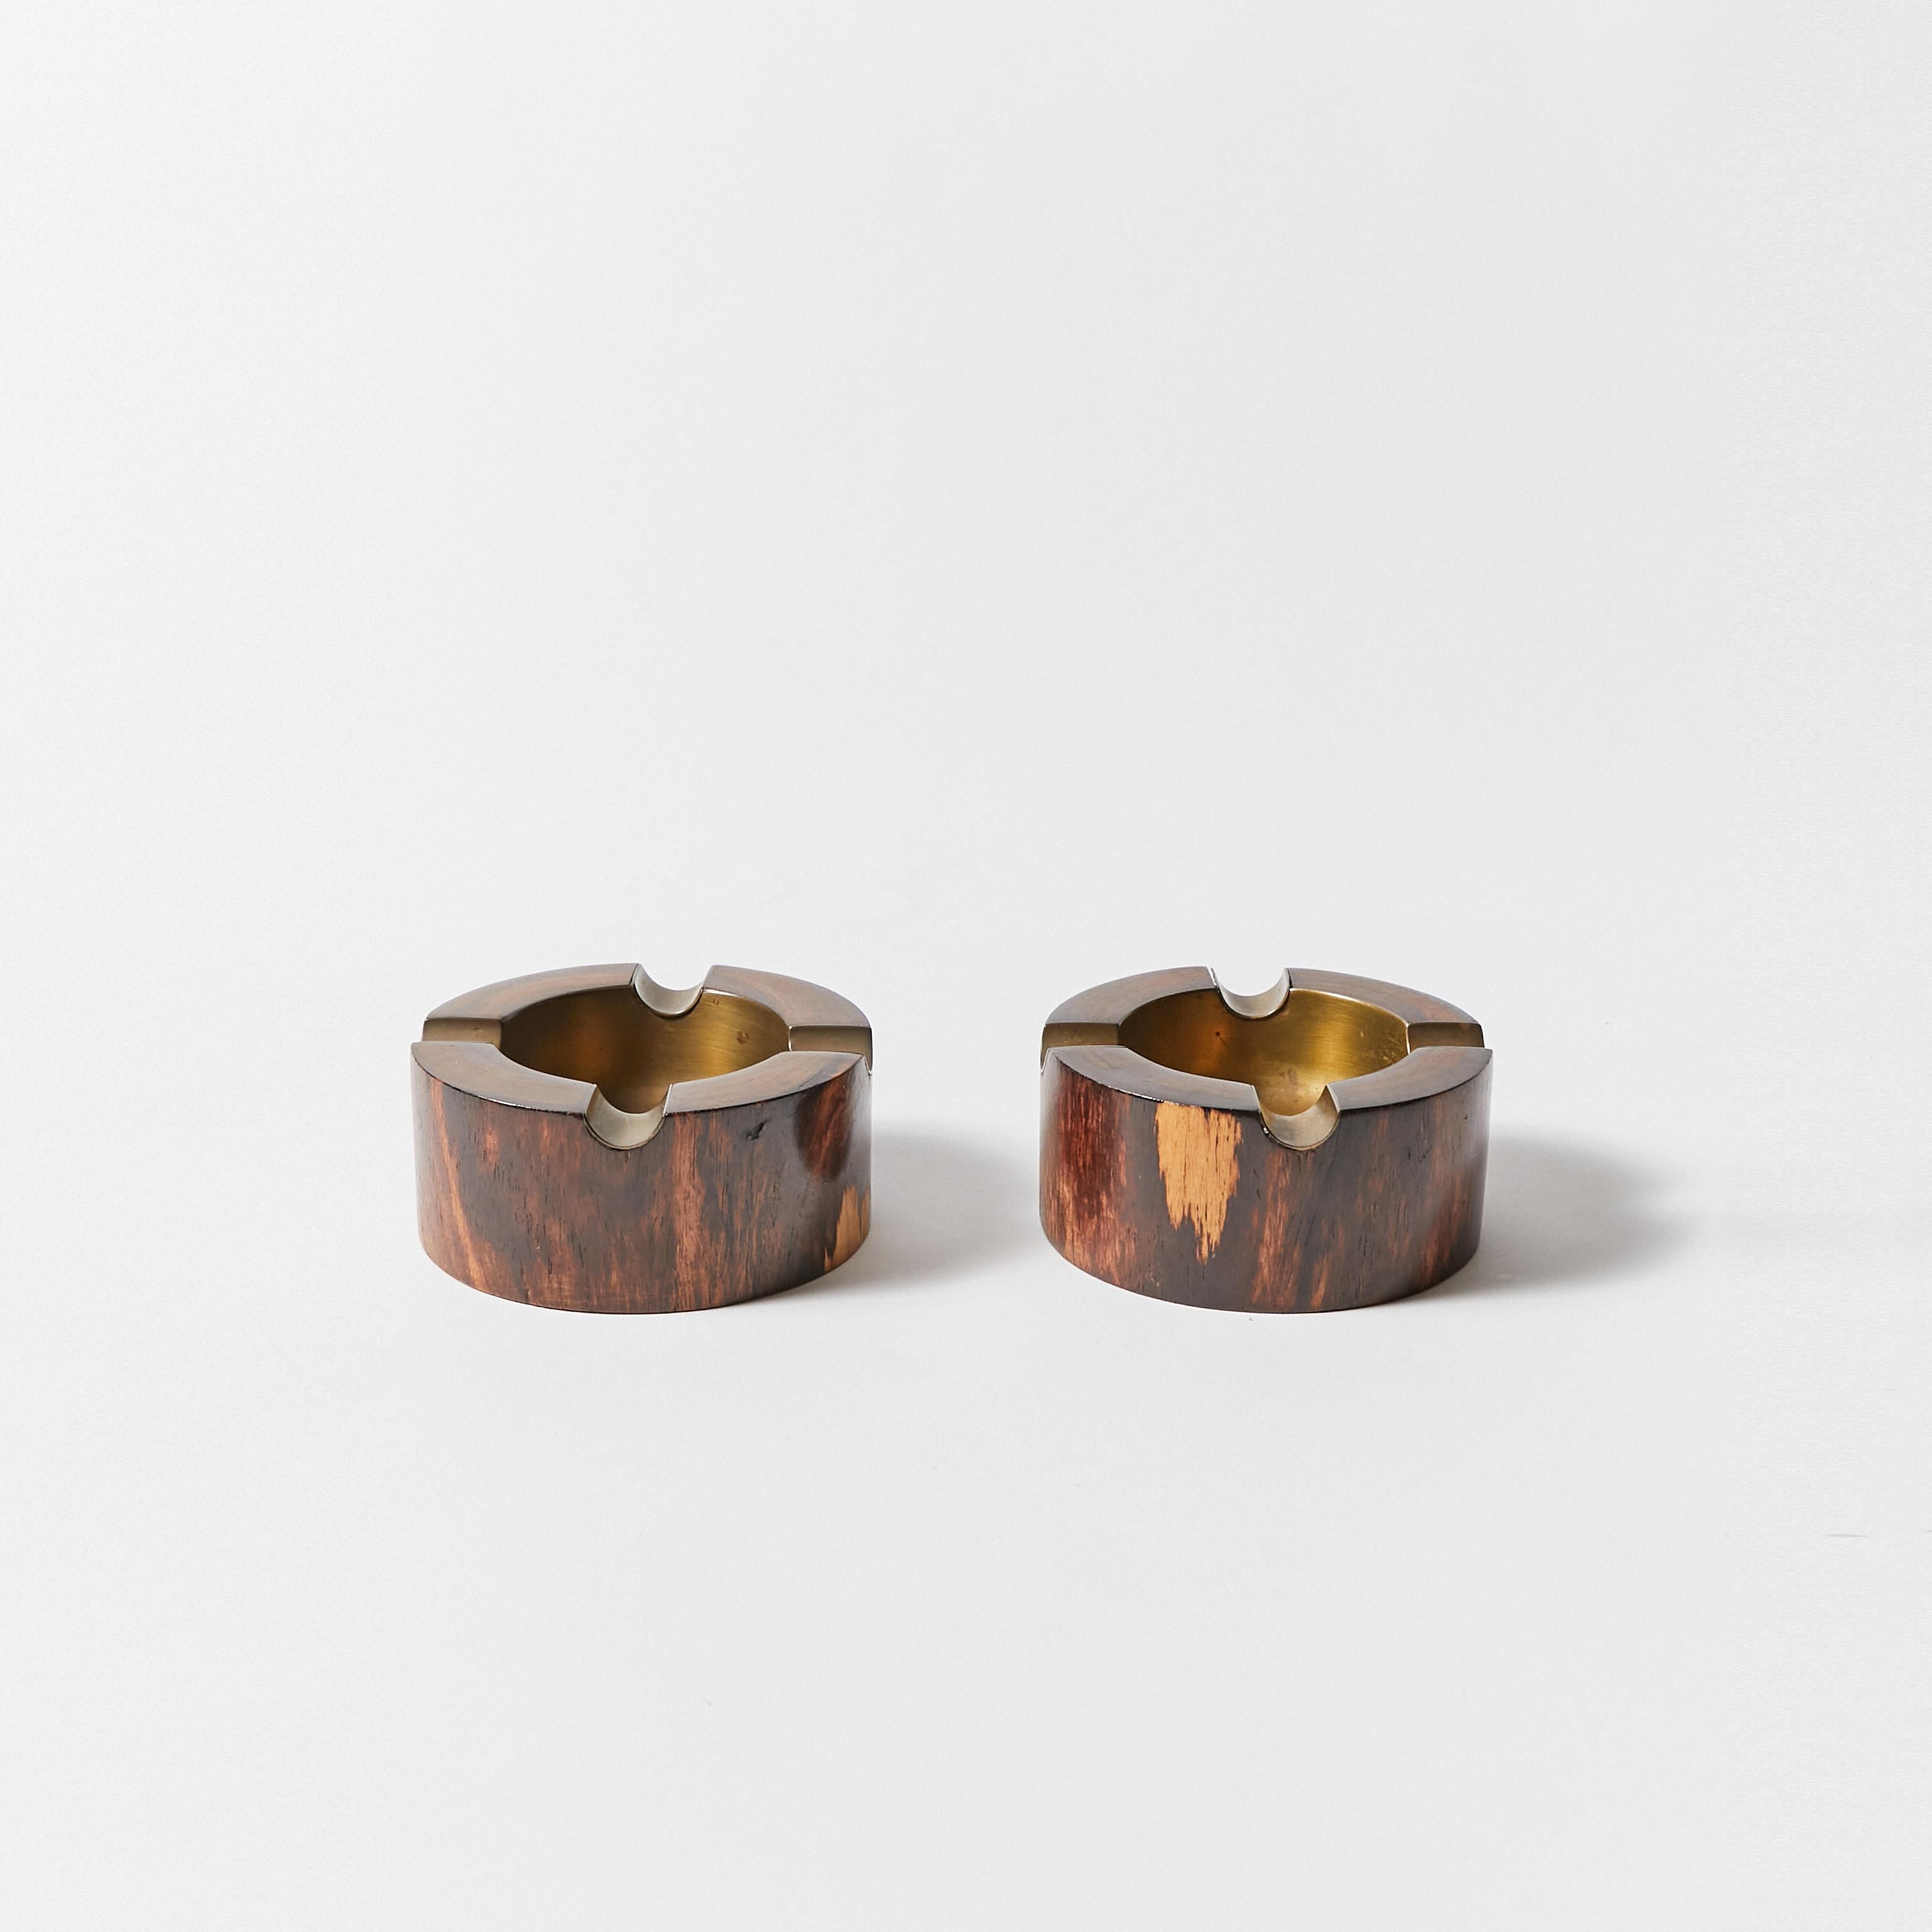 Set of two wooden ashtrays with inset in bronze. Wood seems to be rosewood.